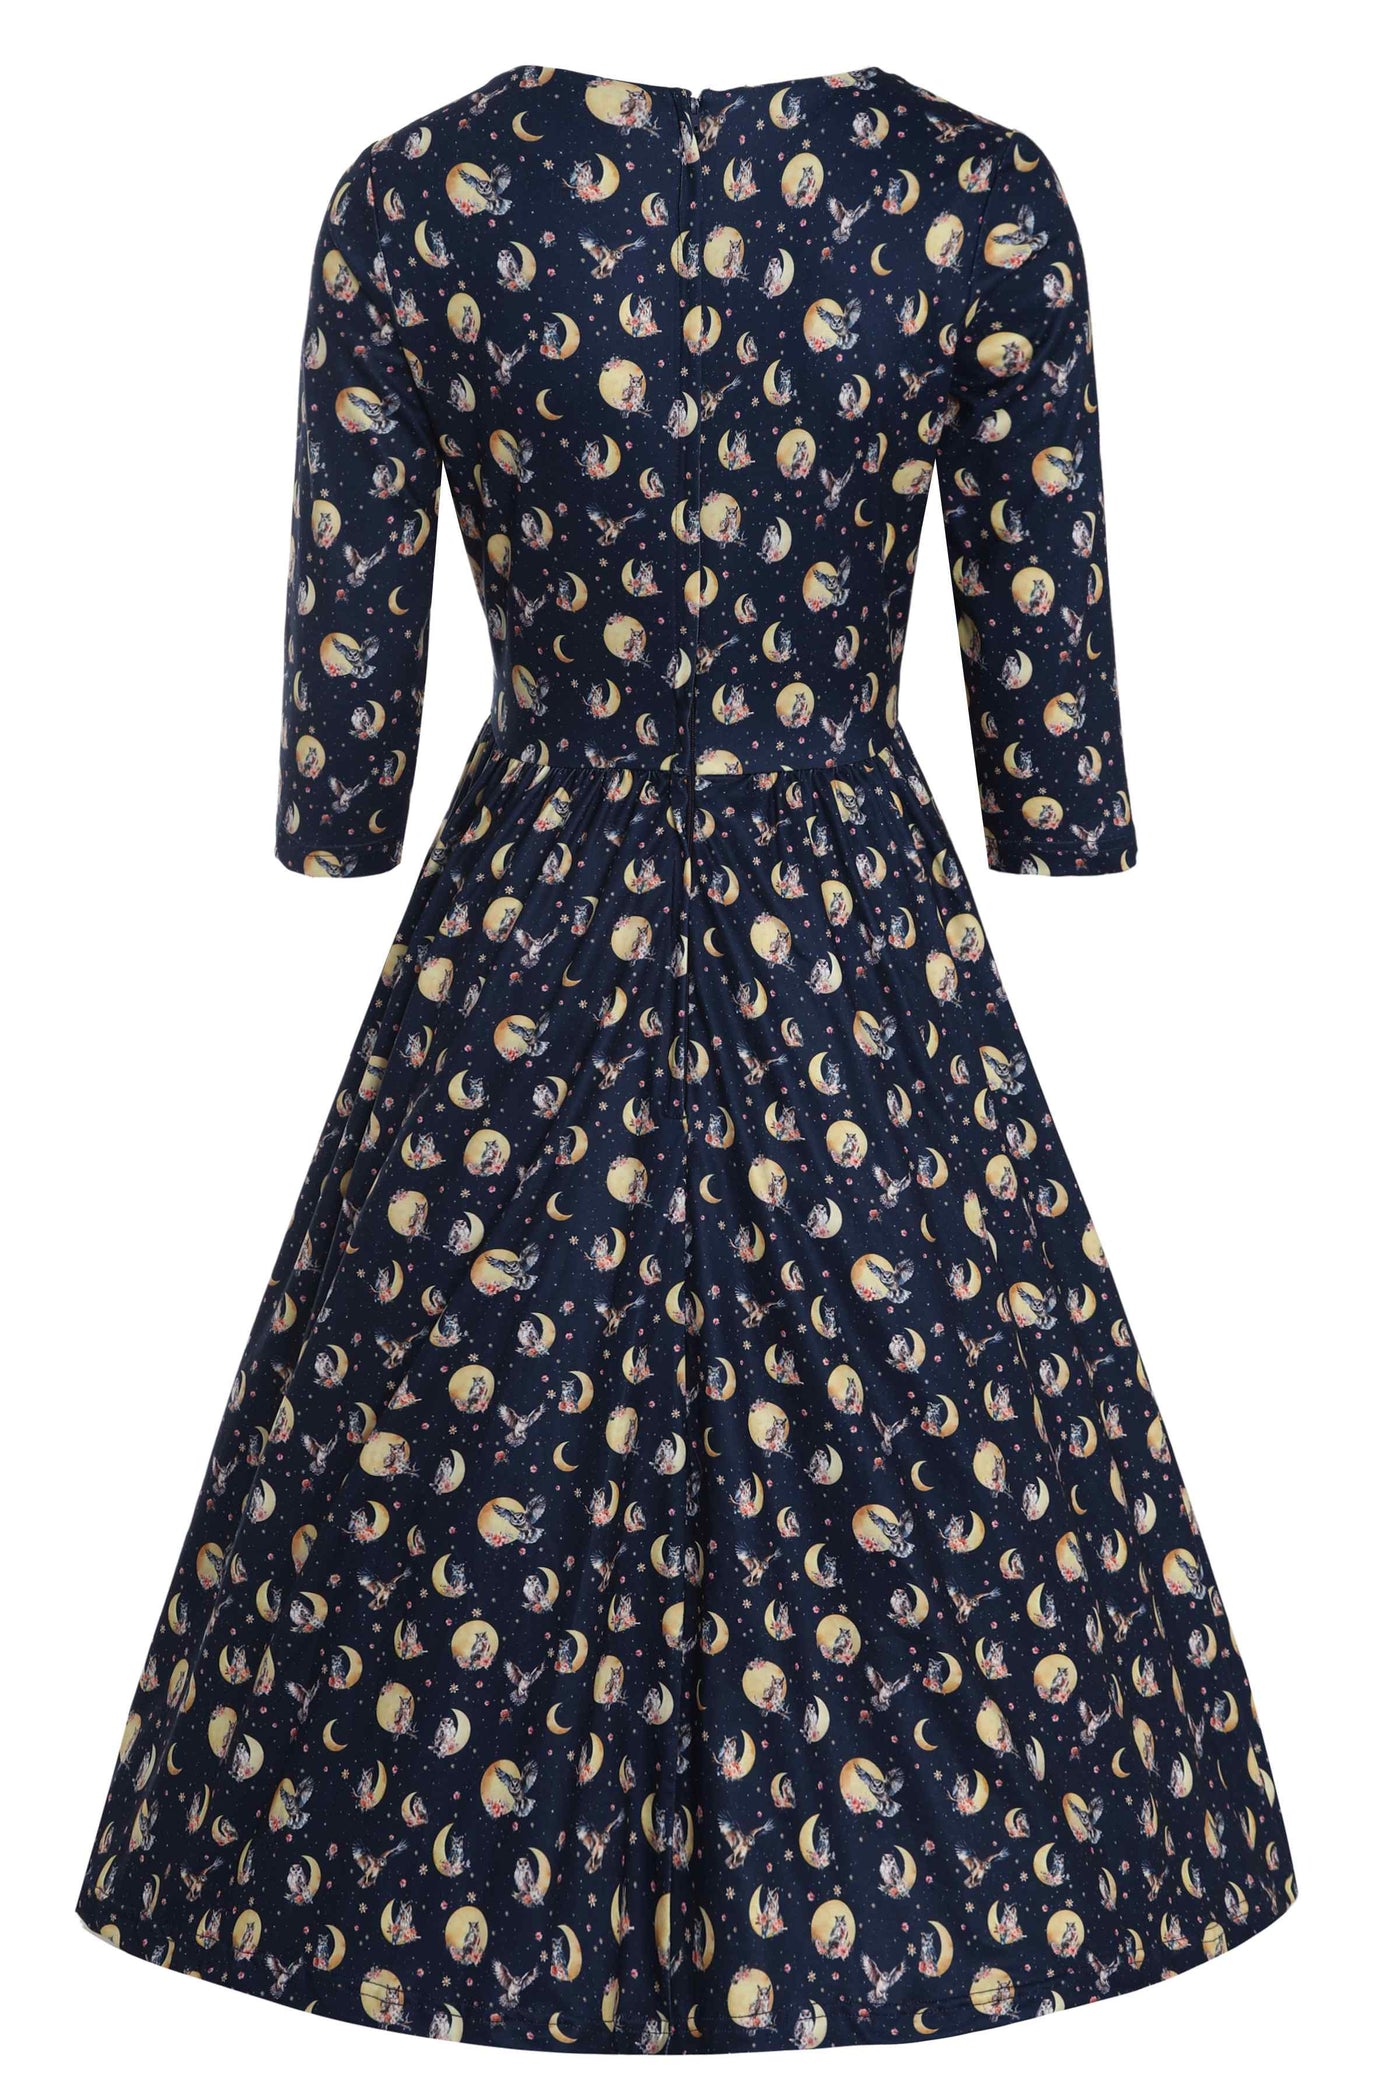 Back view of  Night Owl Print Dress in Navy Blue